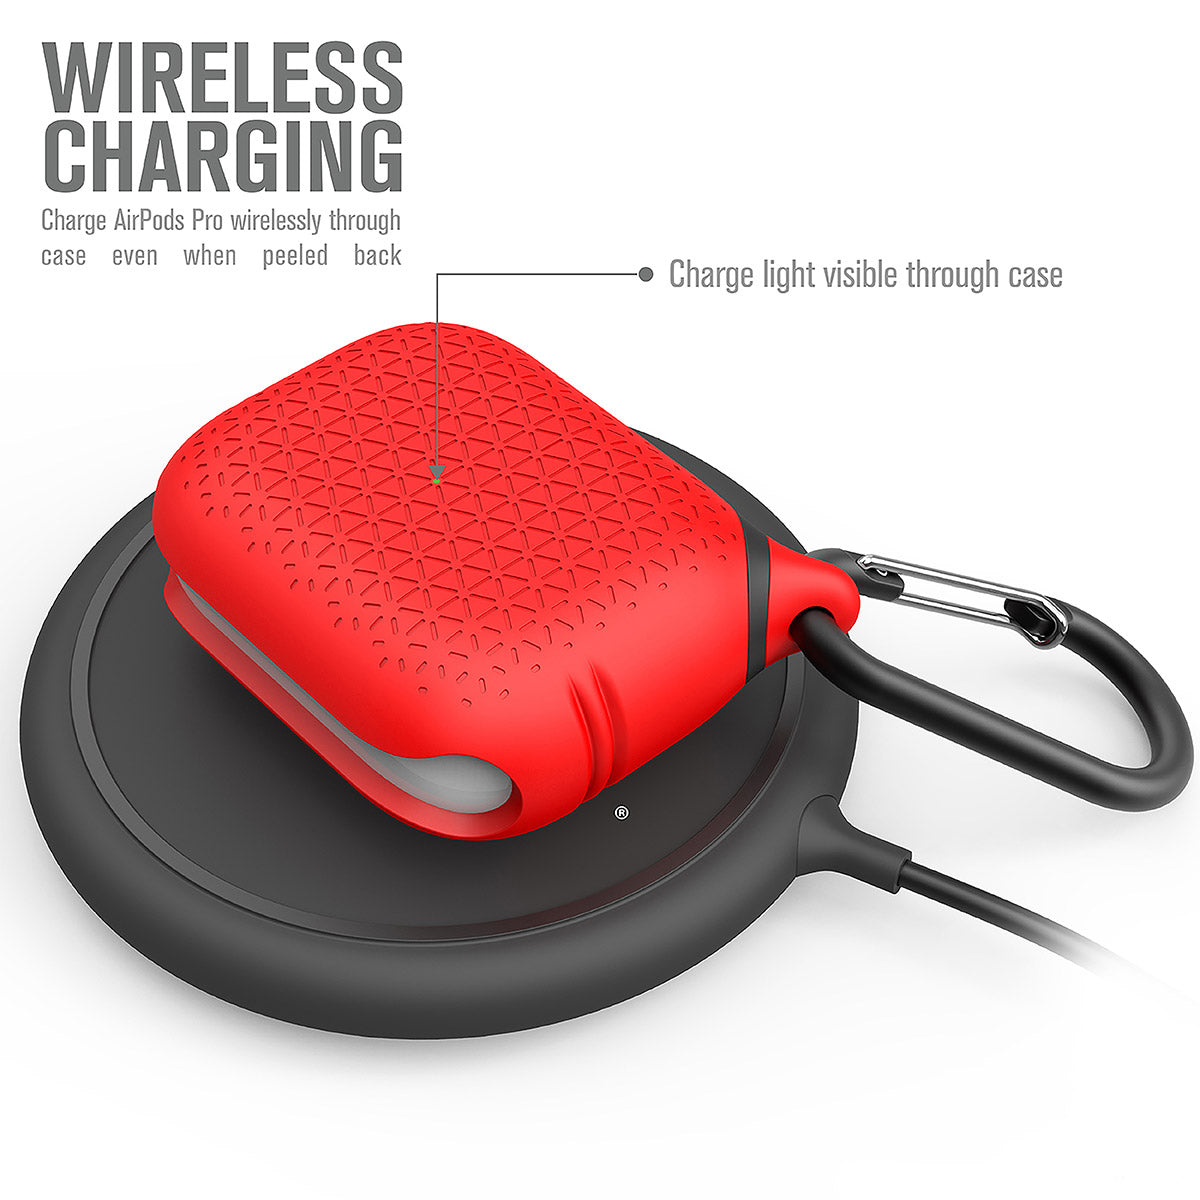 catalyst airpods pro gen 2 1 waterproof case carabiner premium edition flame red on top of a wireless charger text reads wireless charging charge airpods pro wirelessly through case even when peeled back charge light visible through case